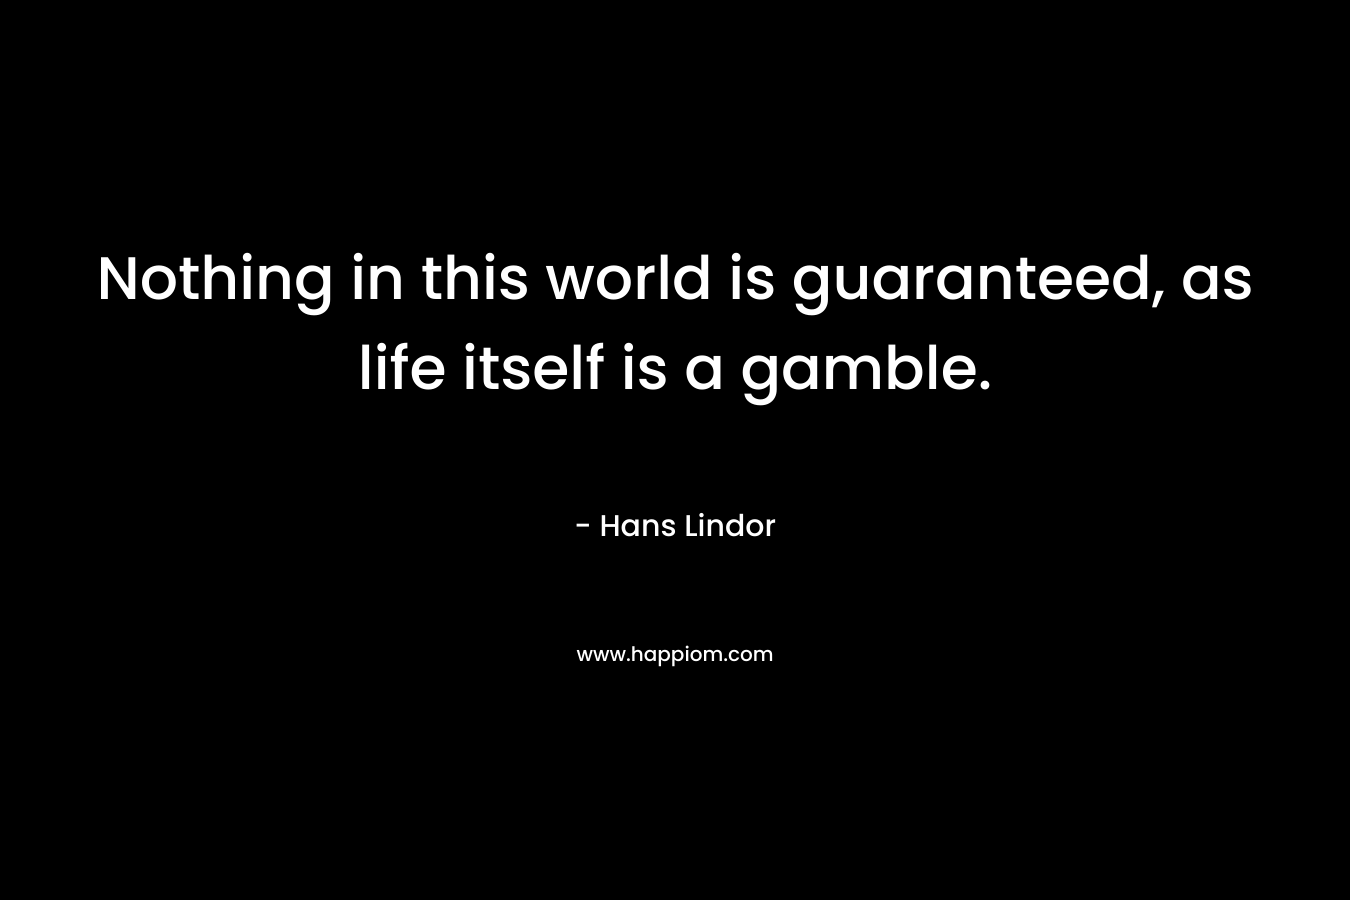 Nothing in this world is guaranteed, as life itself is a gamble. – Hans Lindor